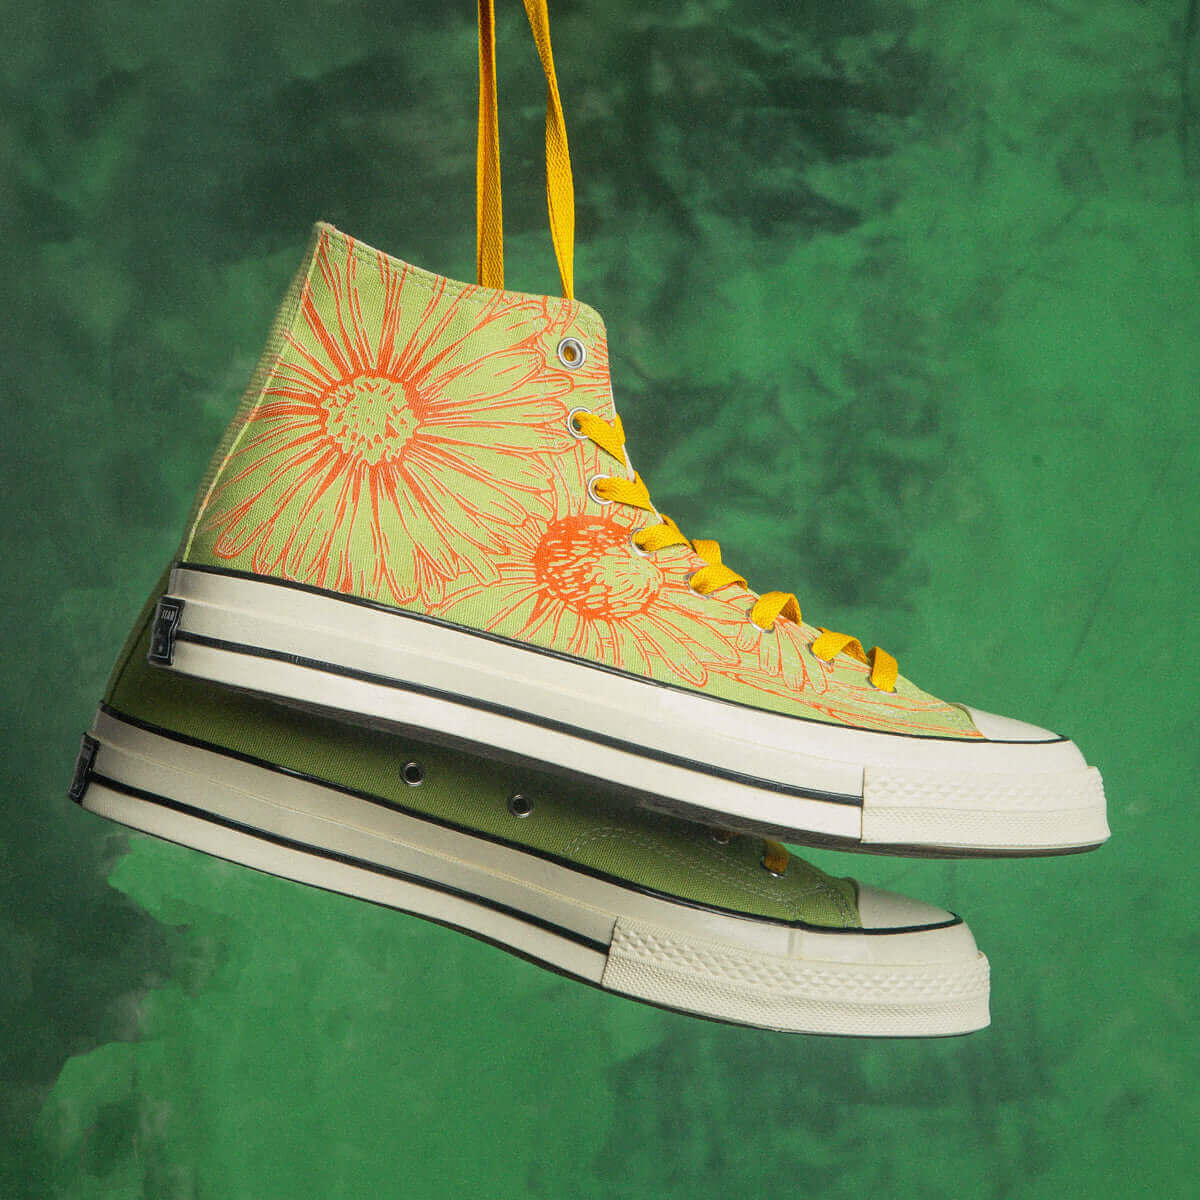 "Buy More Flowers!" Objects by SO x Converse Chuck 70s Hi (Green)